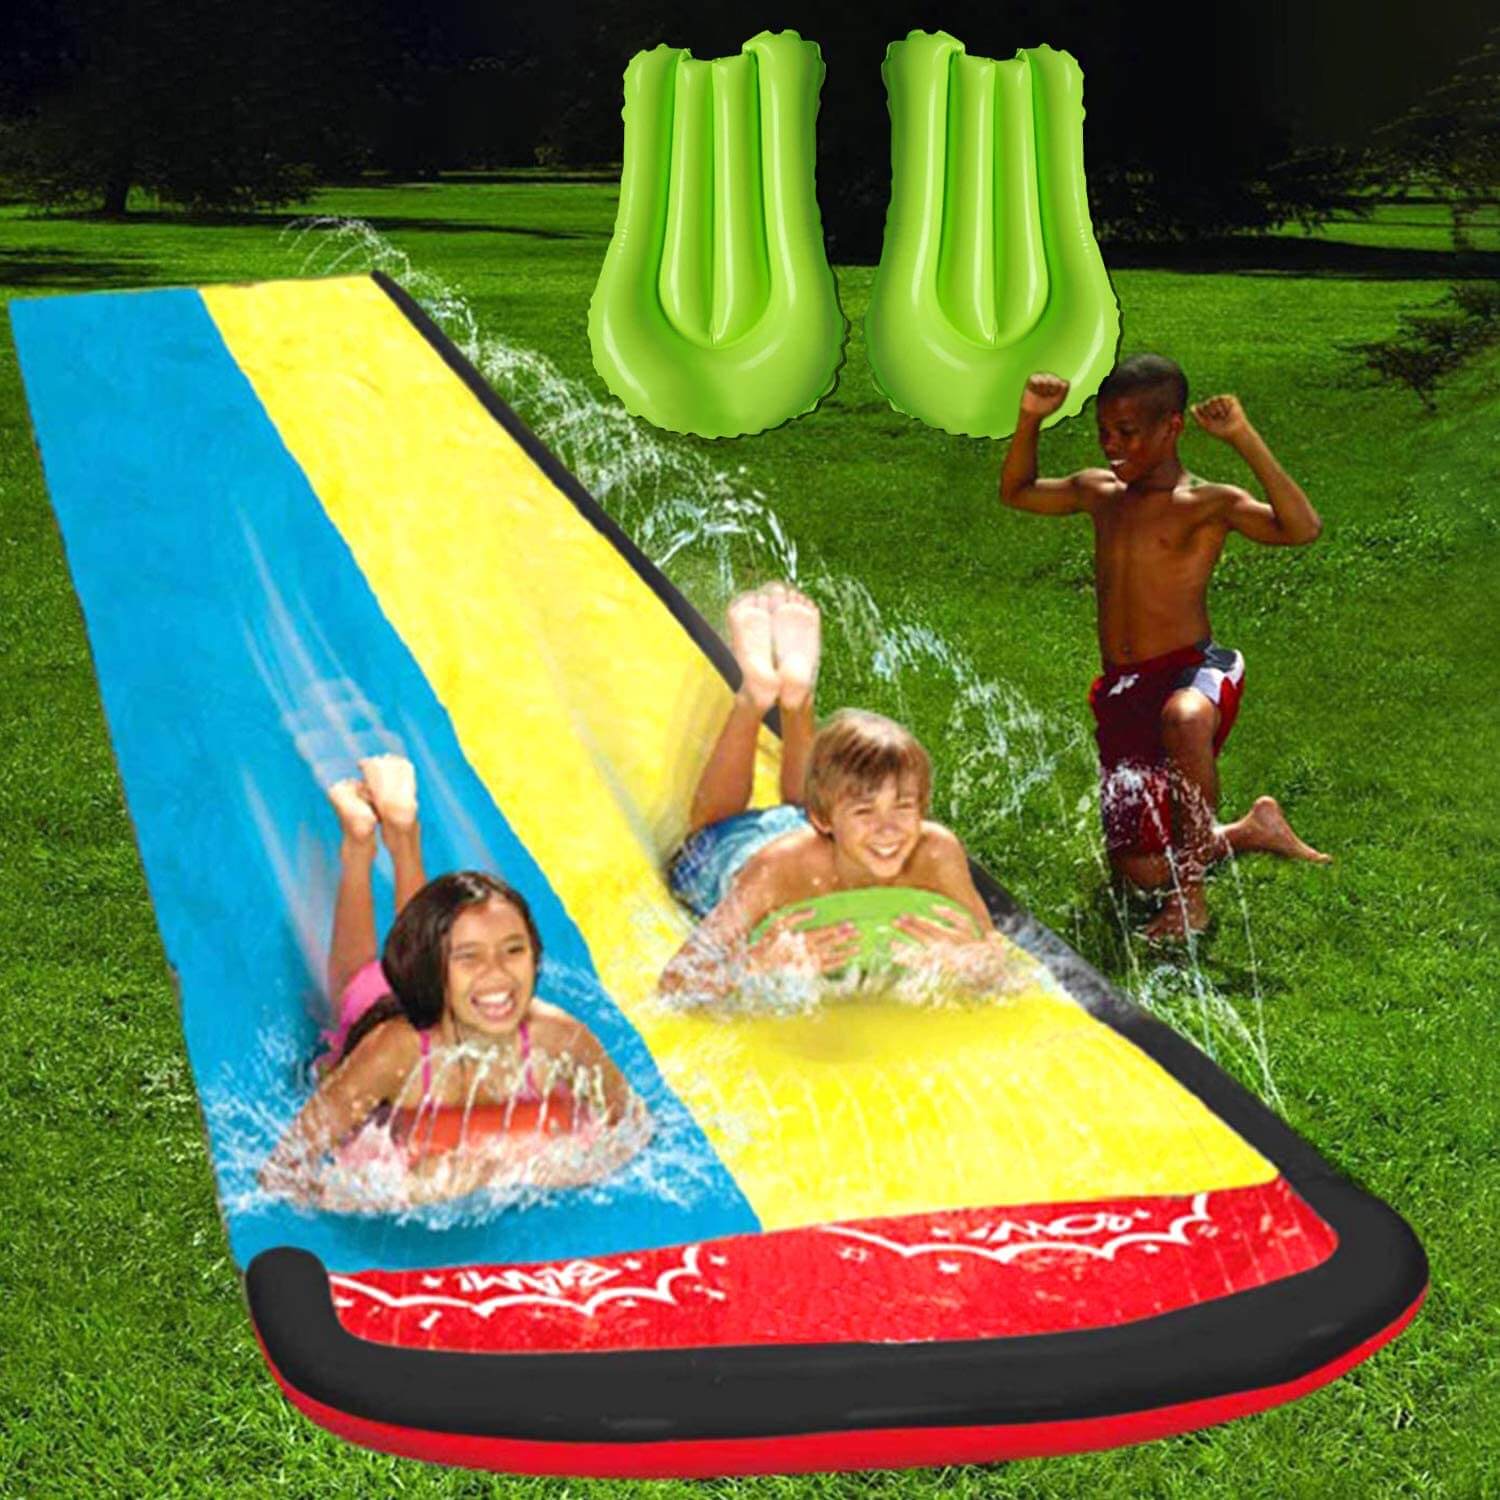 Giant Water Slides for Kids & Adults - Best Giant Water Slides for Kids & Adults - LINWEY